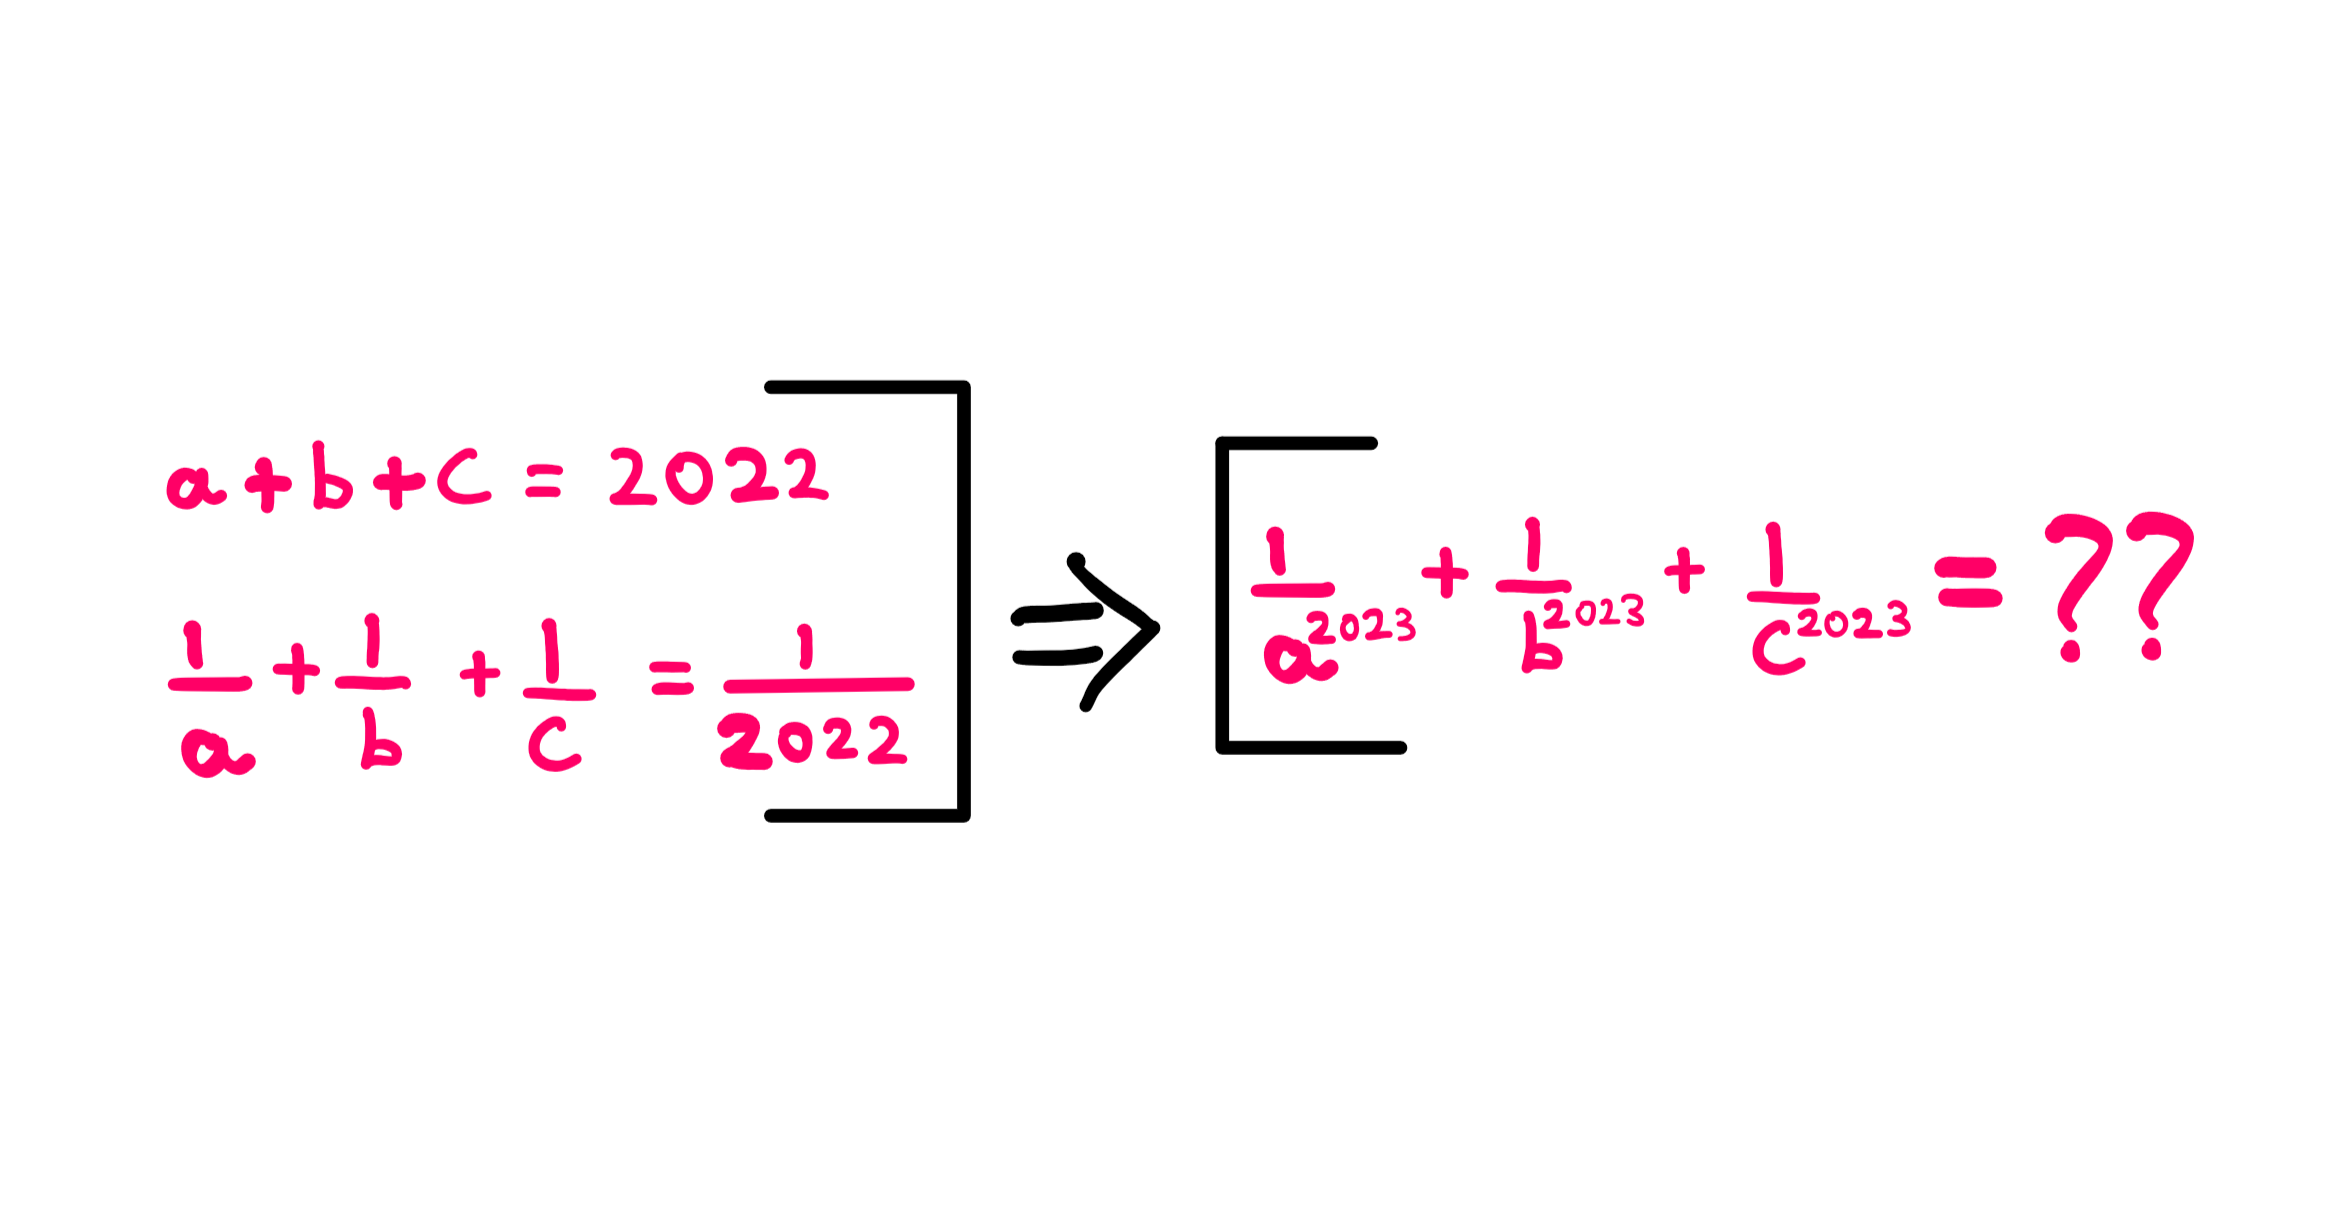 How To Really Solve This Tricky Algebra Problem (XI) - Whiteboard style graphics showing the following information: The following two equations are written on the left: a+b+c=2022; (1/a)+(1/b)+(1/c) = 1/2022; On the right, the following question is asked: (1/a²⁰²³) + (1/b²⁰²³) + (1/c²⁰²³) = ? (what)